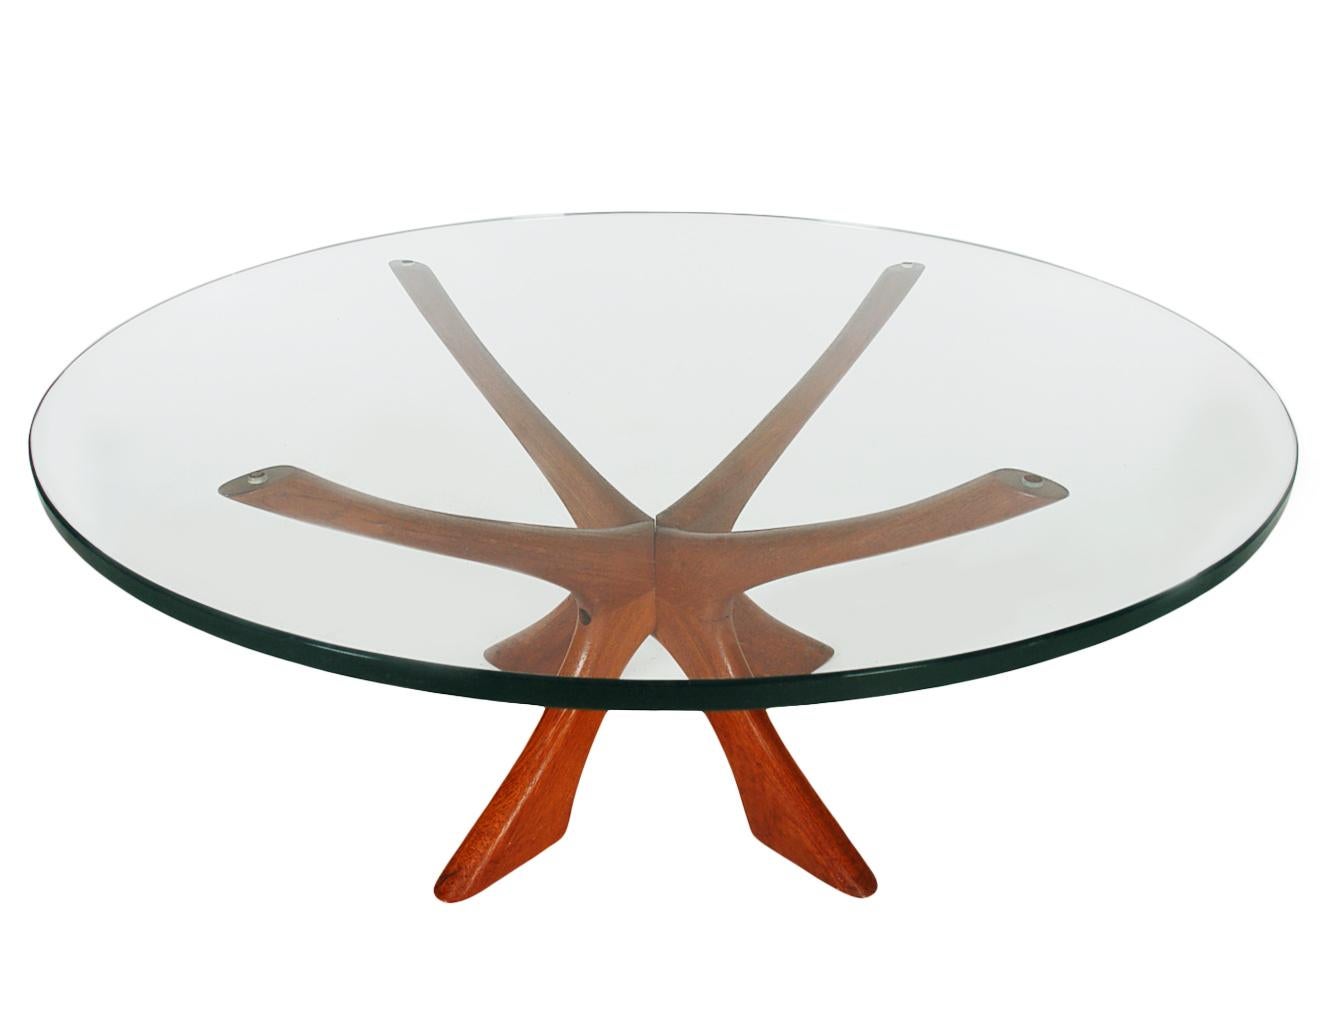 A Scandinavian Classic designed by Illum Wikkelsø and manufactured by CFC Silkeborg in Denmark, circa 1960s. The table features a solid teak constructed base with a super thick clear glass top.